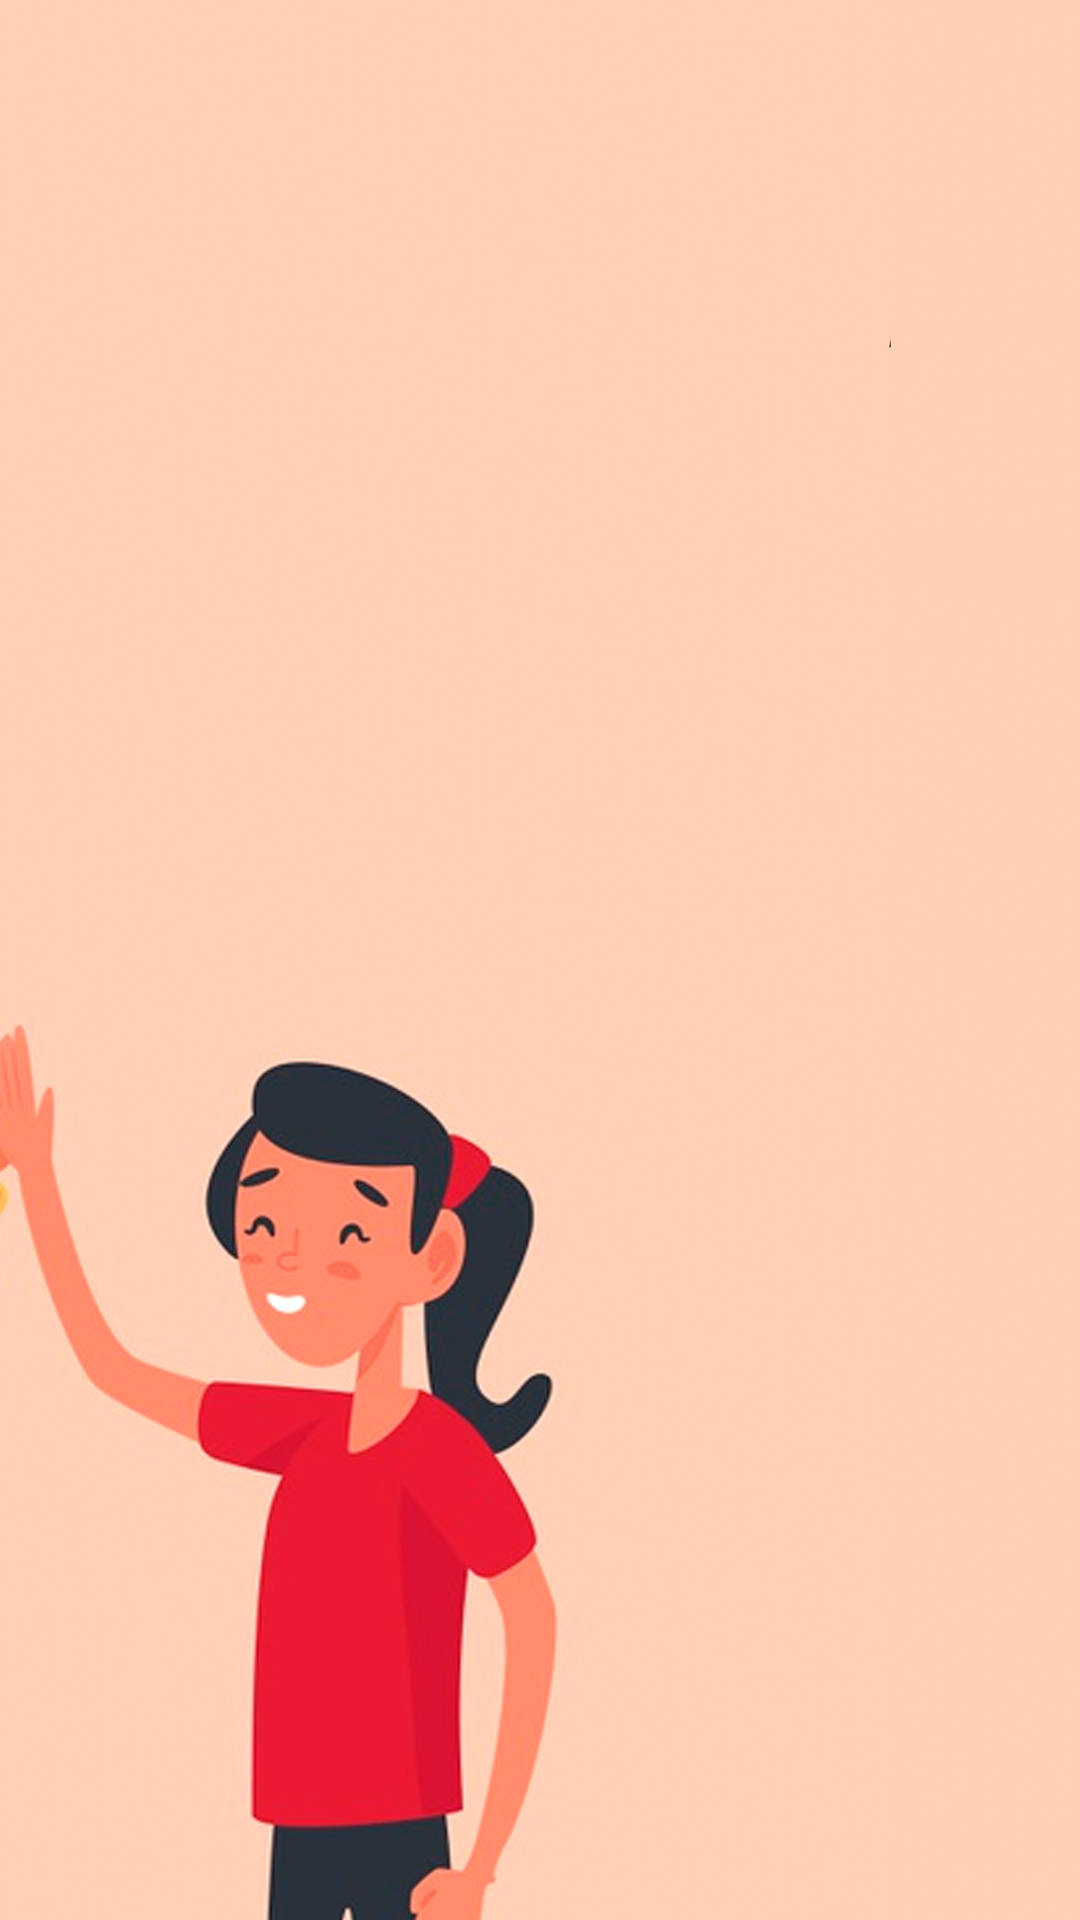 Matching Female High-five Background